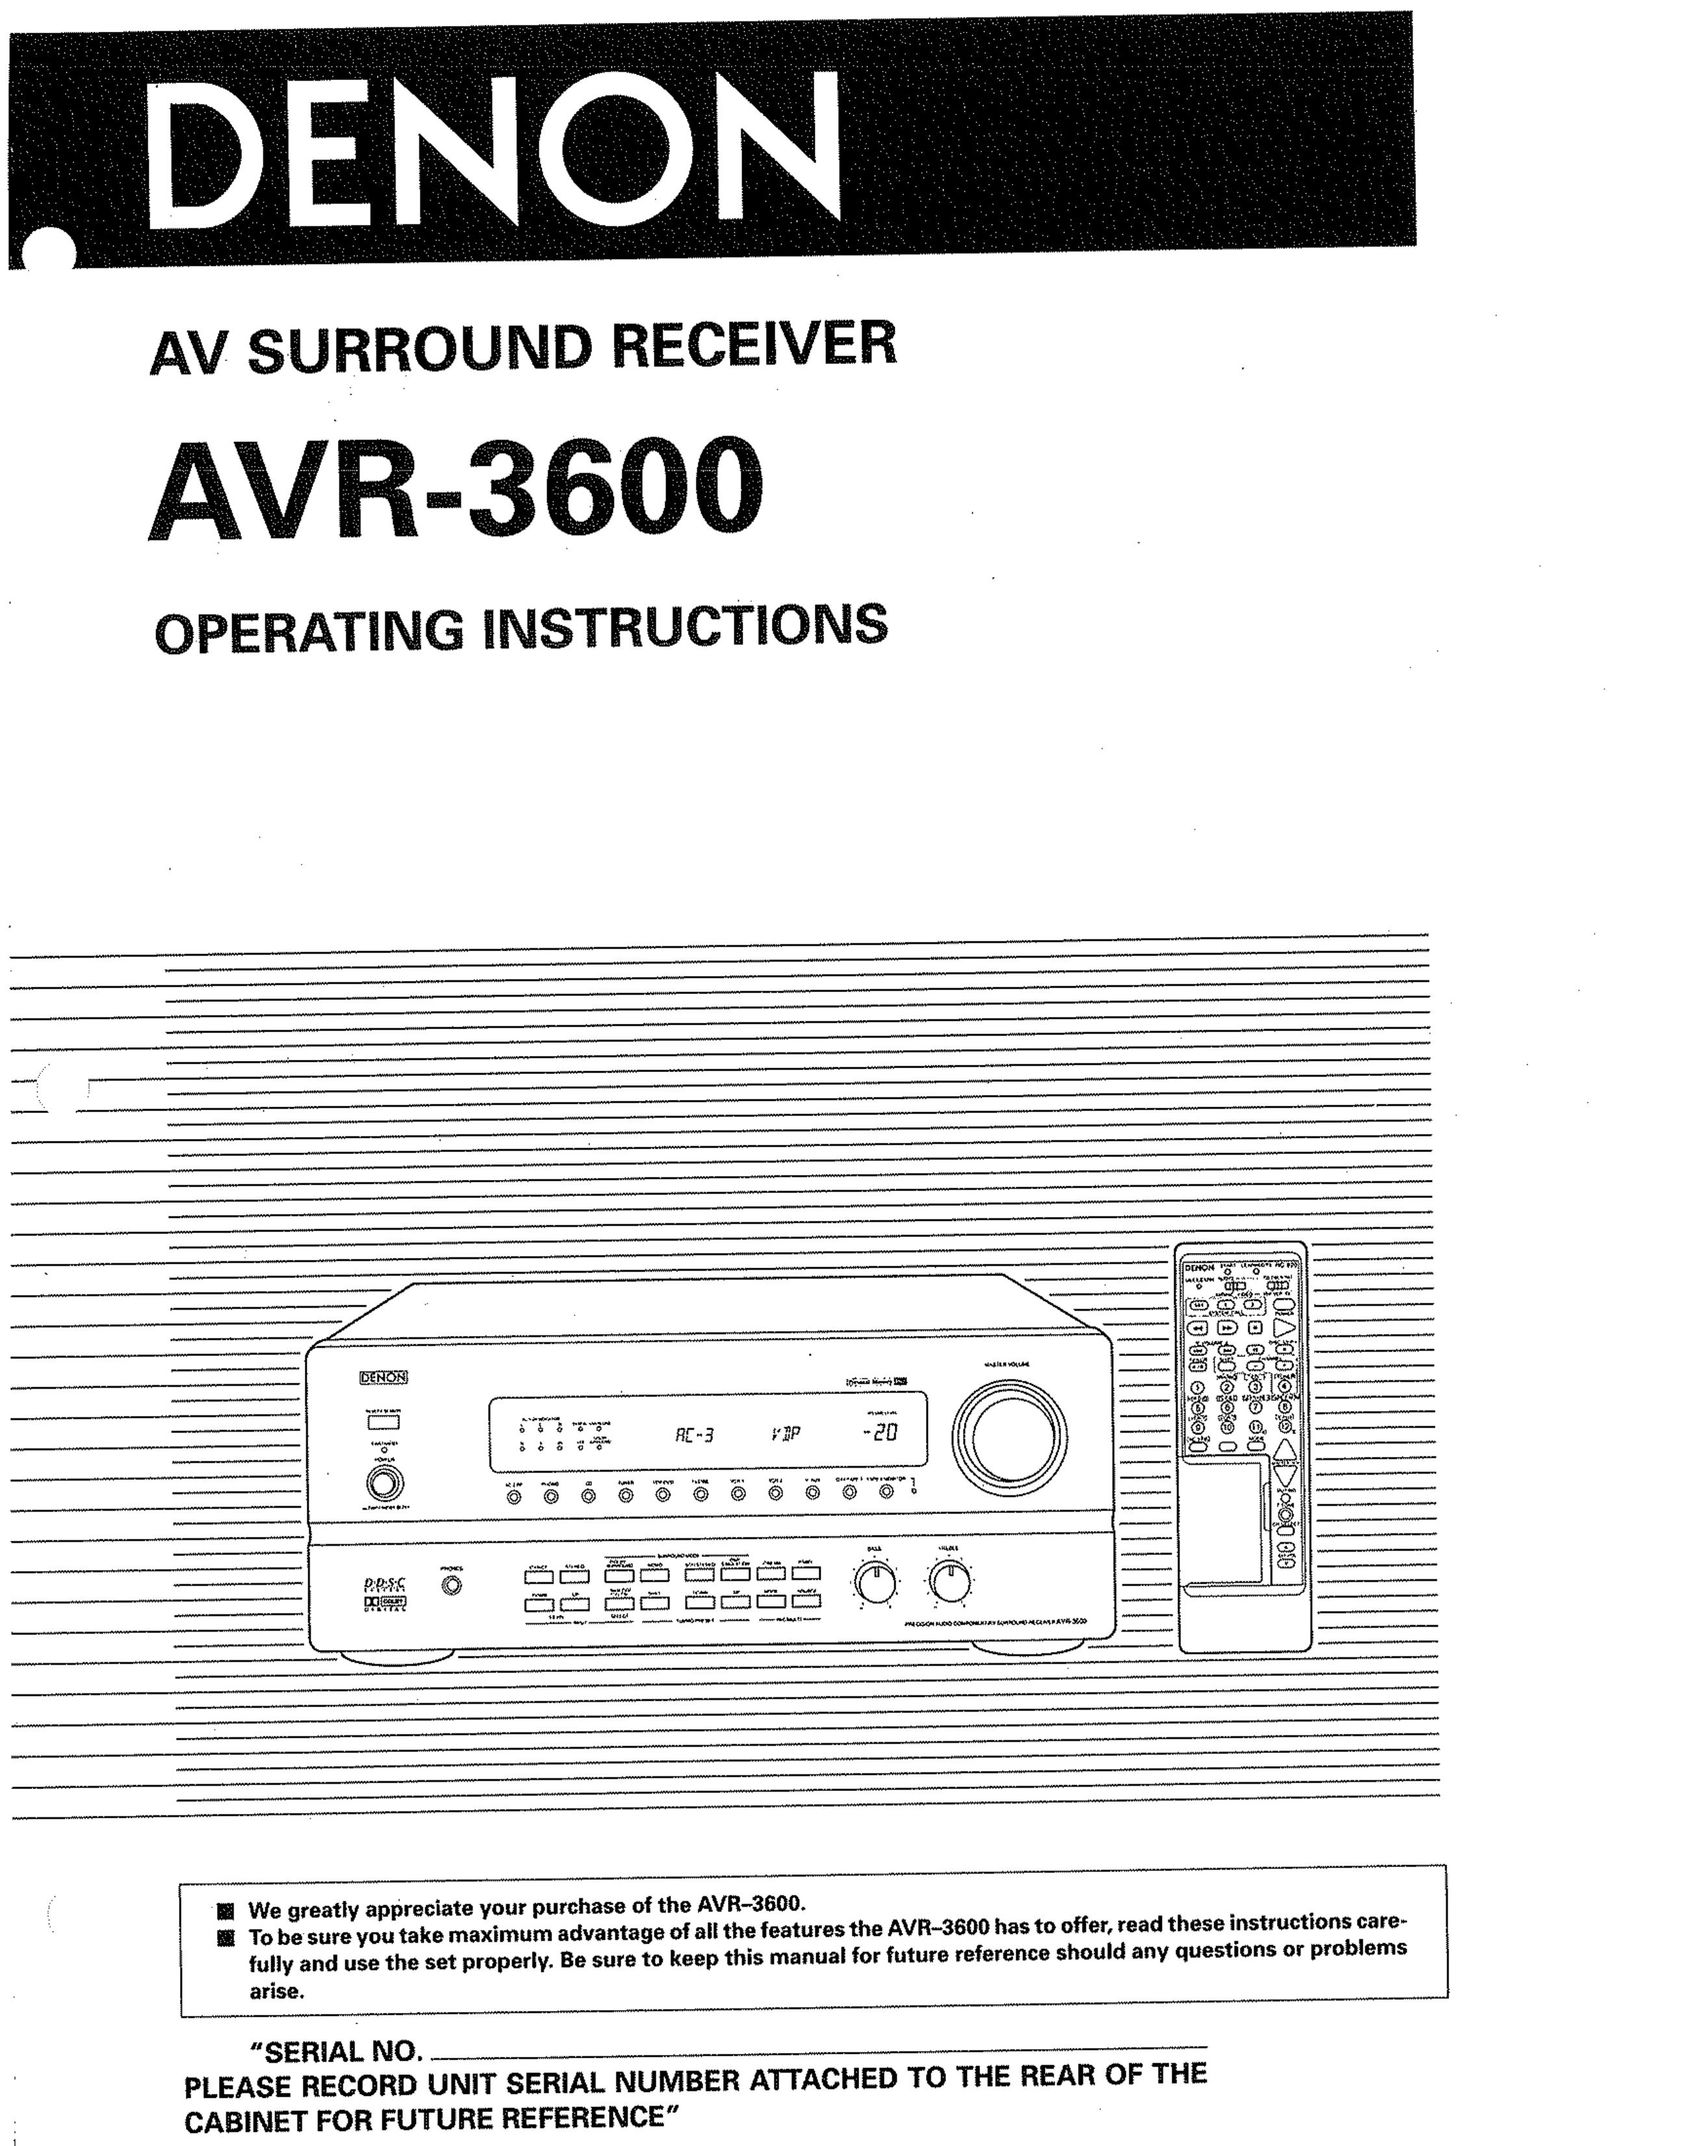 Denon AVR-3600 Home Theater System User Manual